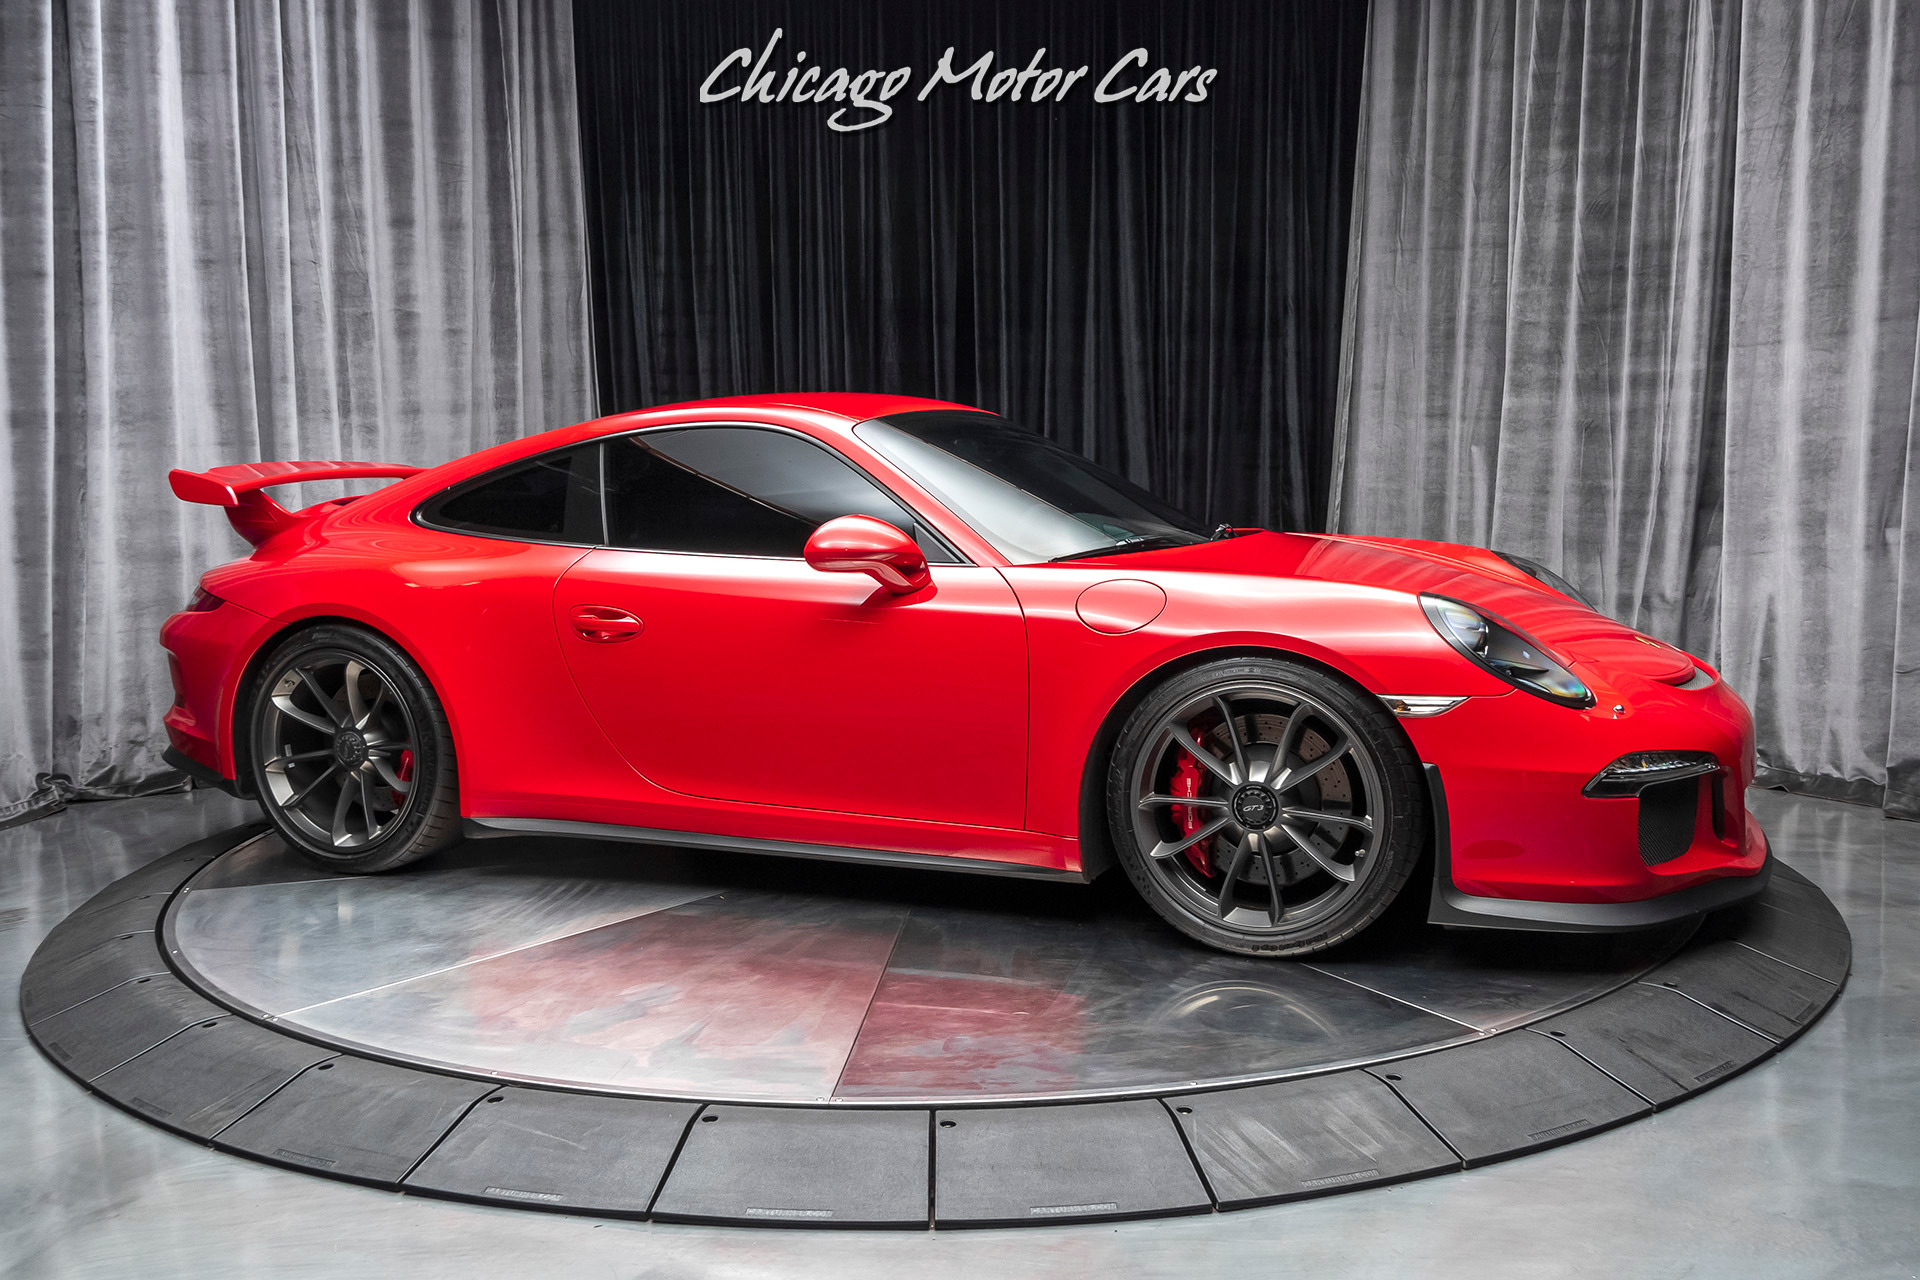 Used-2015-Porsche-911-GT3-Coupe-MSRP-139K-PDK-TRANS-FRONT-LIFT-AFTERMARKET-EXHAUST